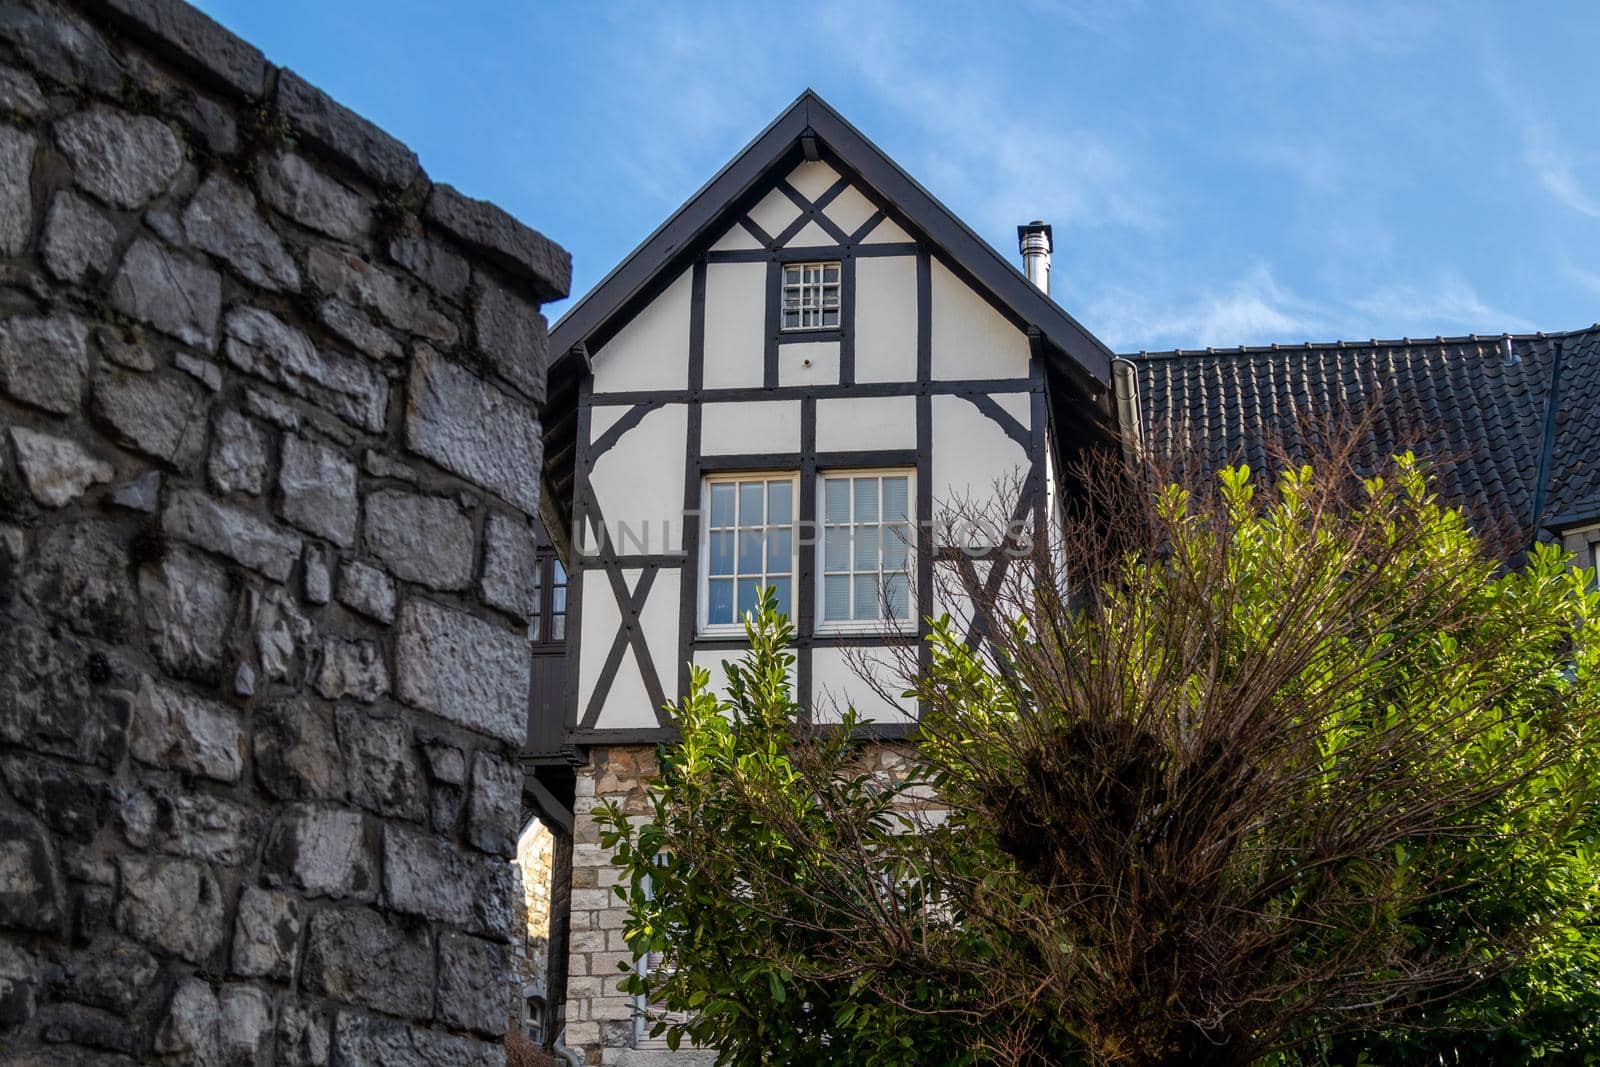 Half-timbered house in the old town of Stolberg, Eifel, Germany